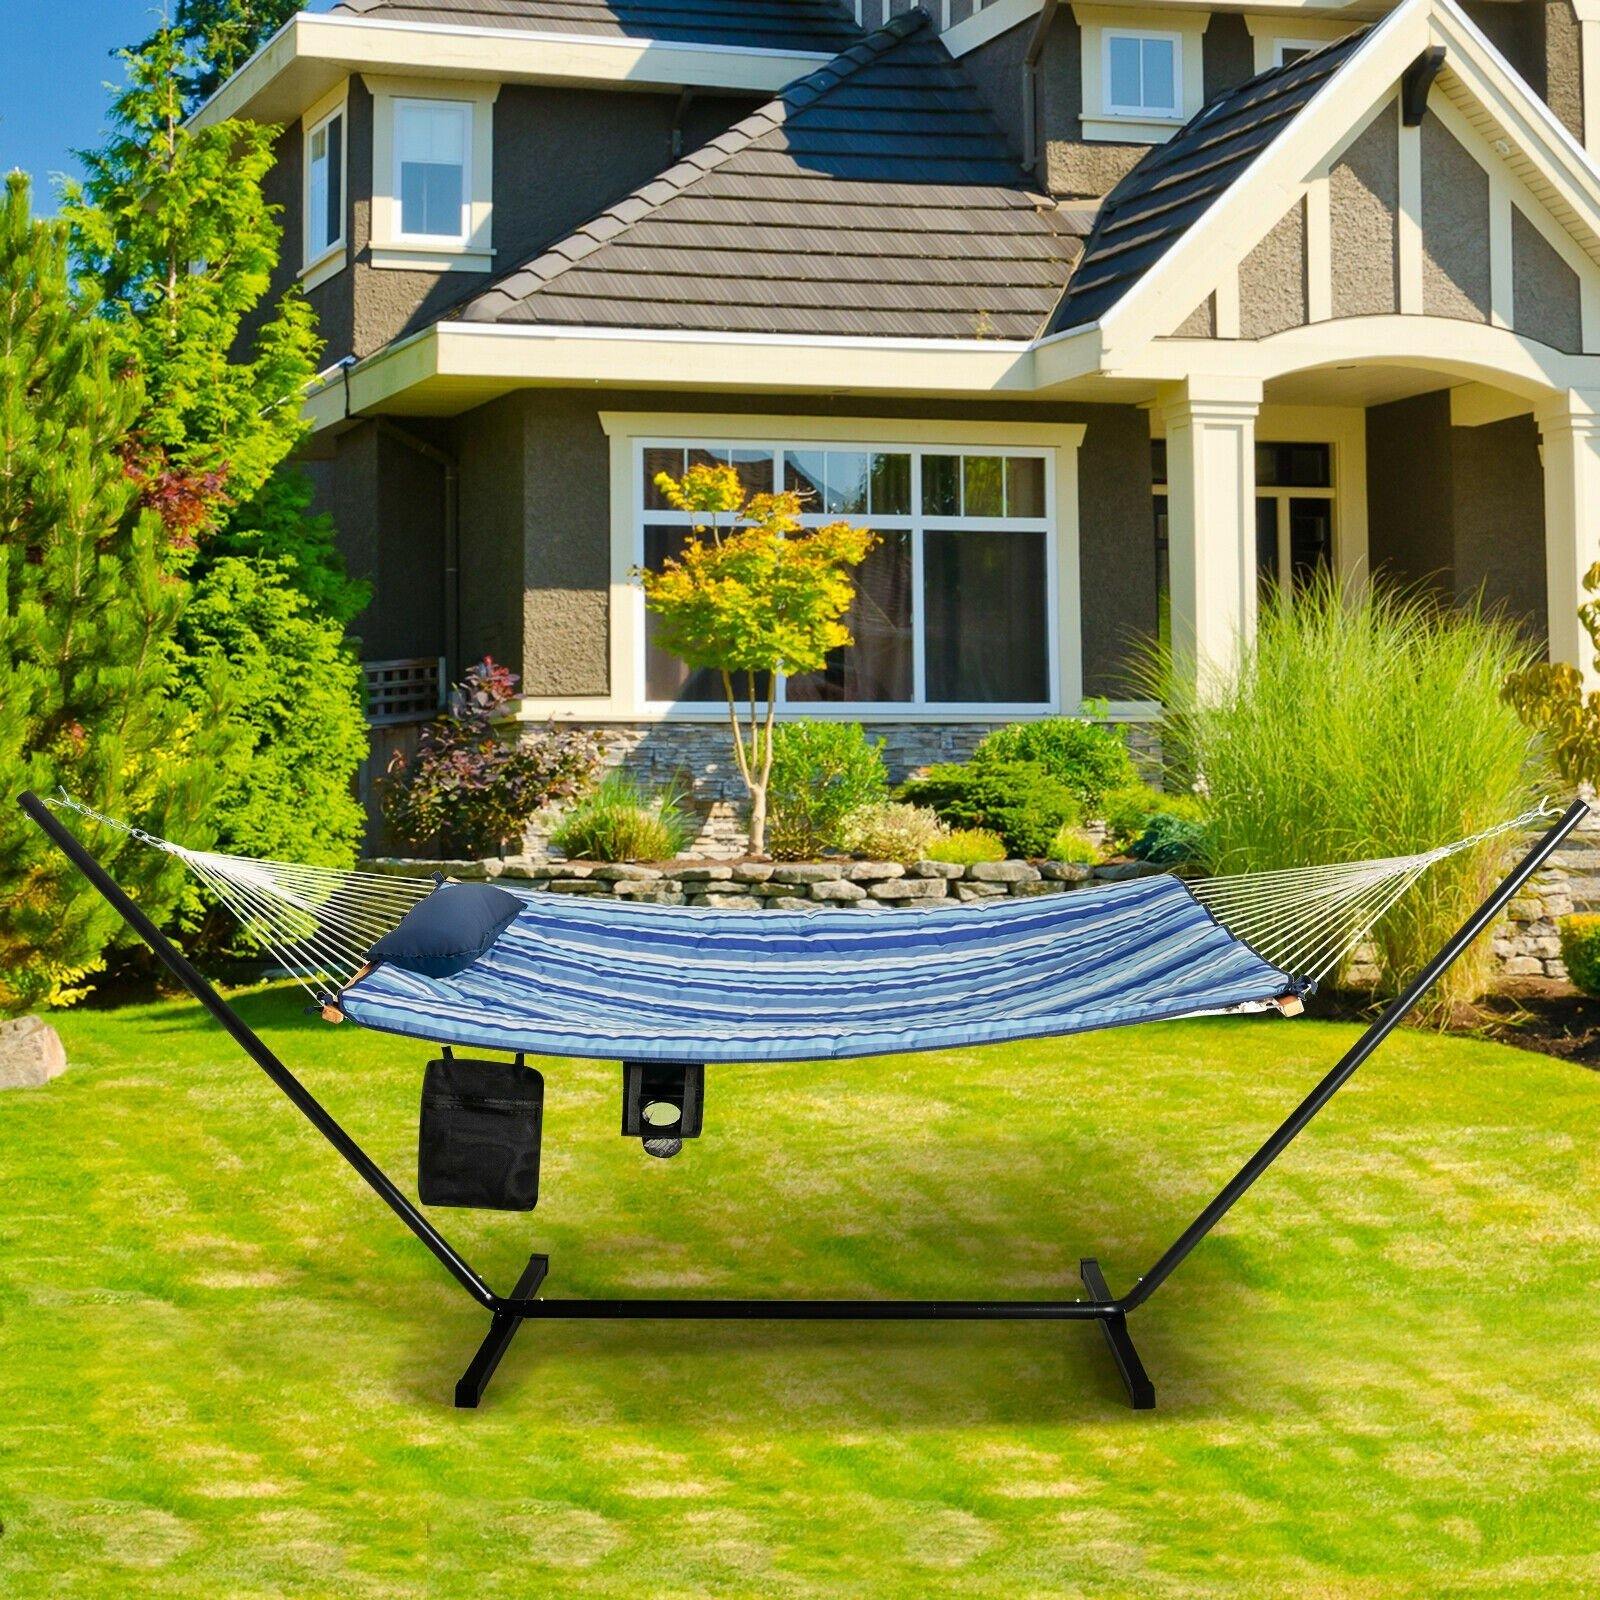 12Ft Hammock with Stand, 2 Person Heavy-Duty Steel Hammock Stand, 450 lbs Capacity (Blue and Beige Striped) - Giantexus